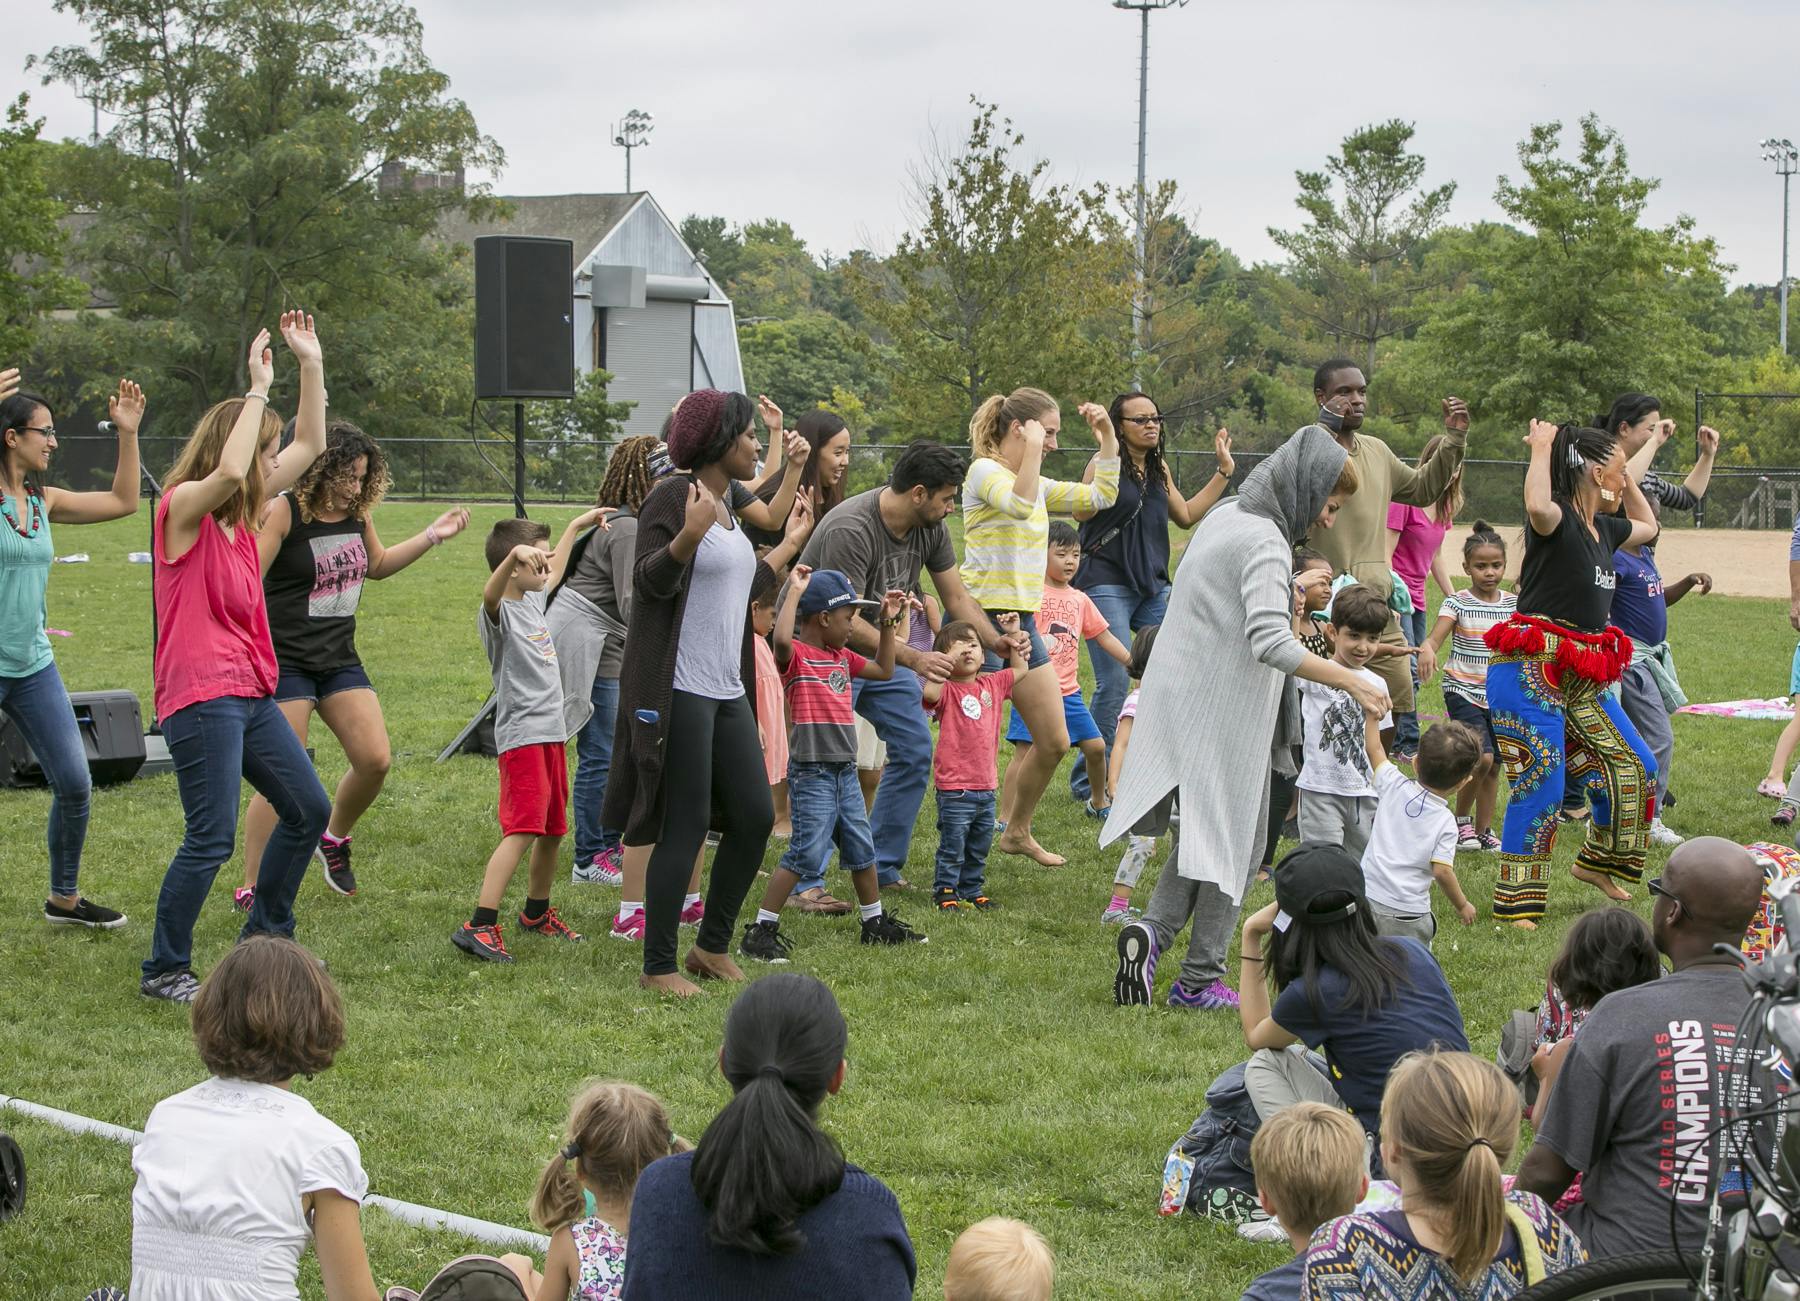 Several children and parents are dancing outside at Denehy Park family fun day